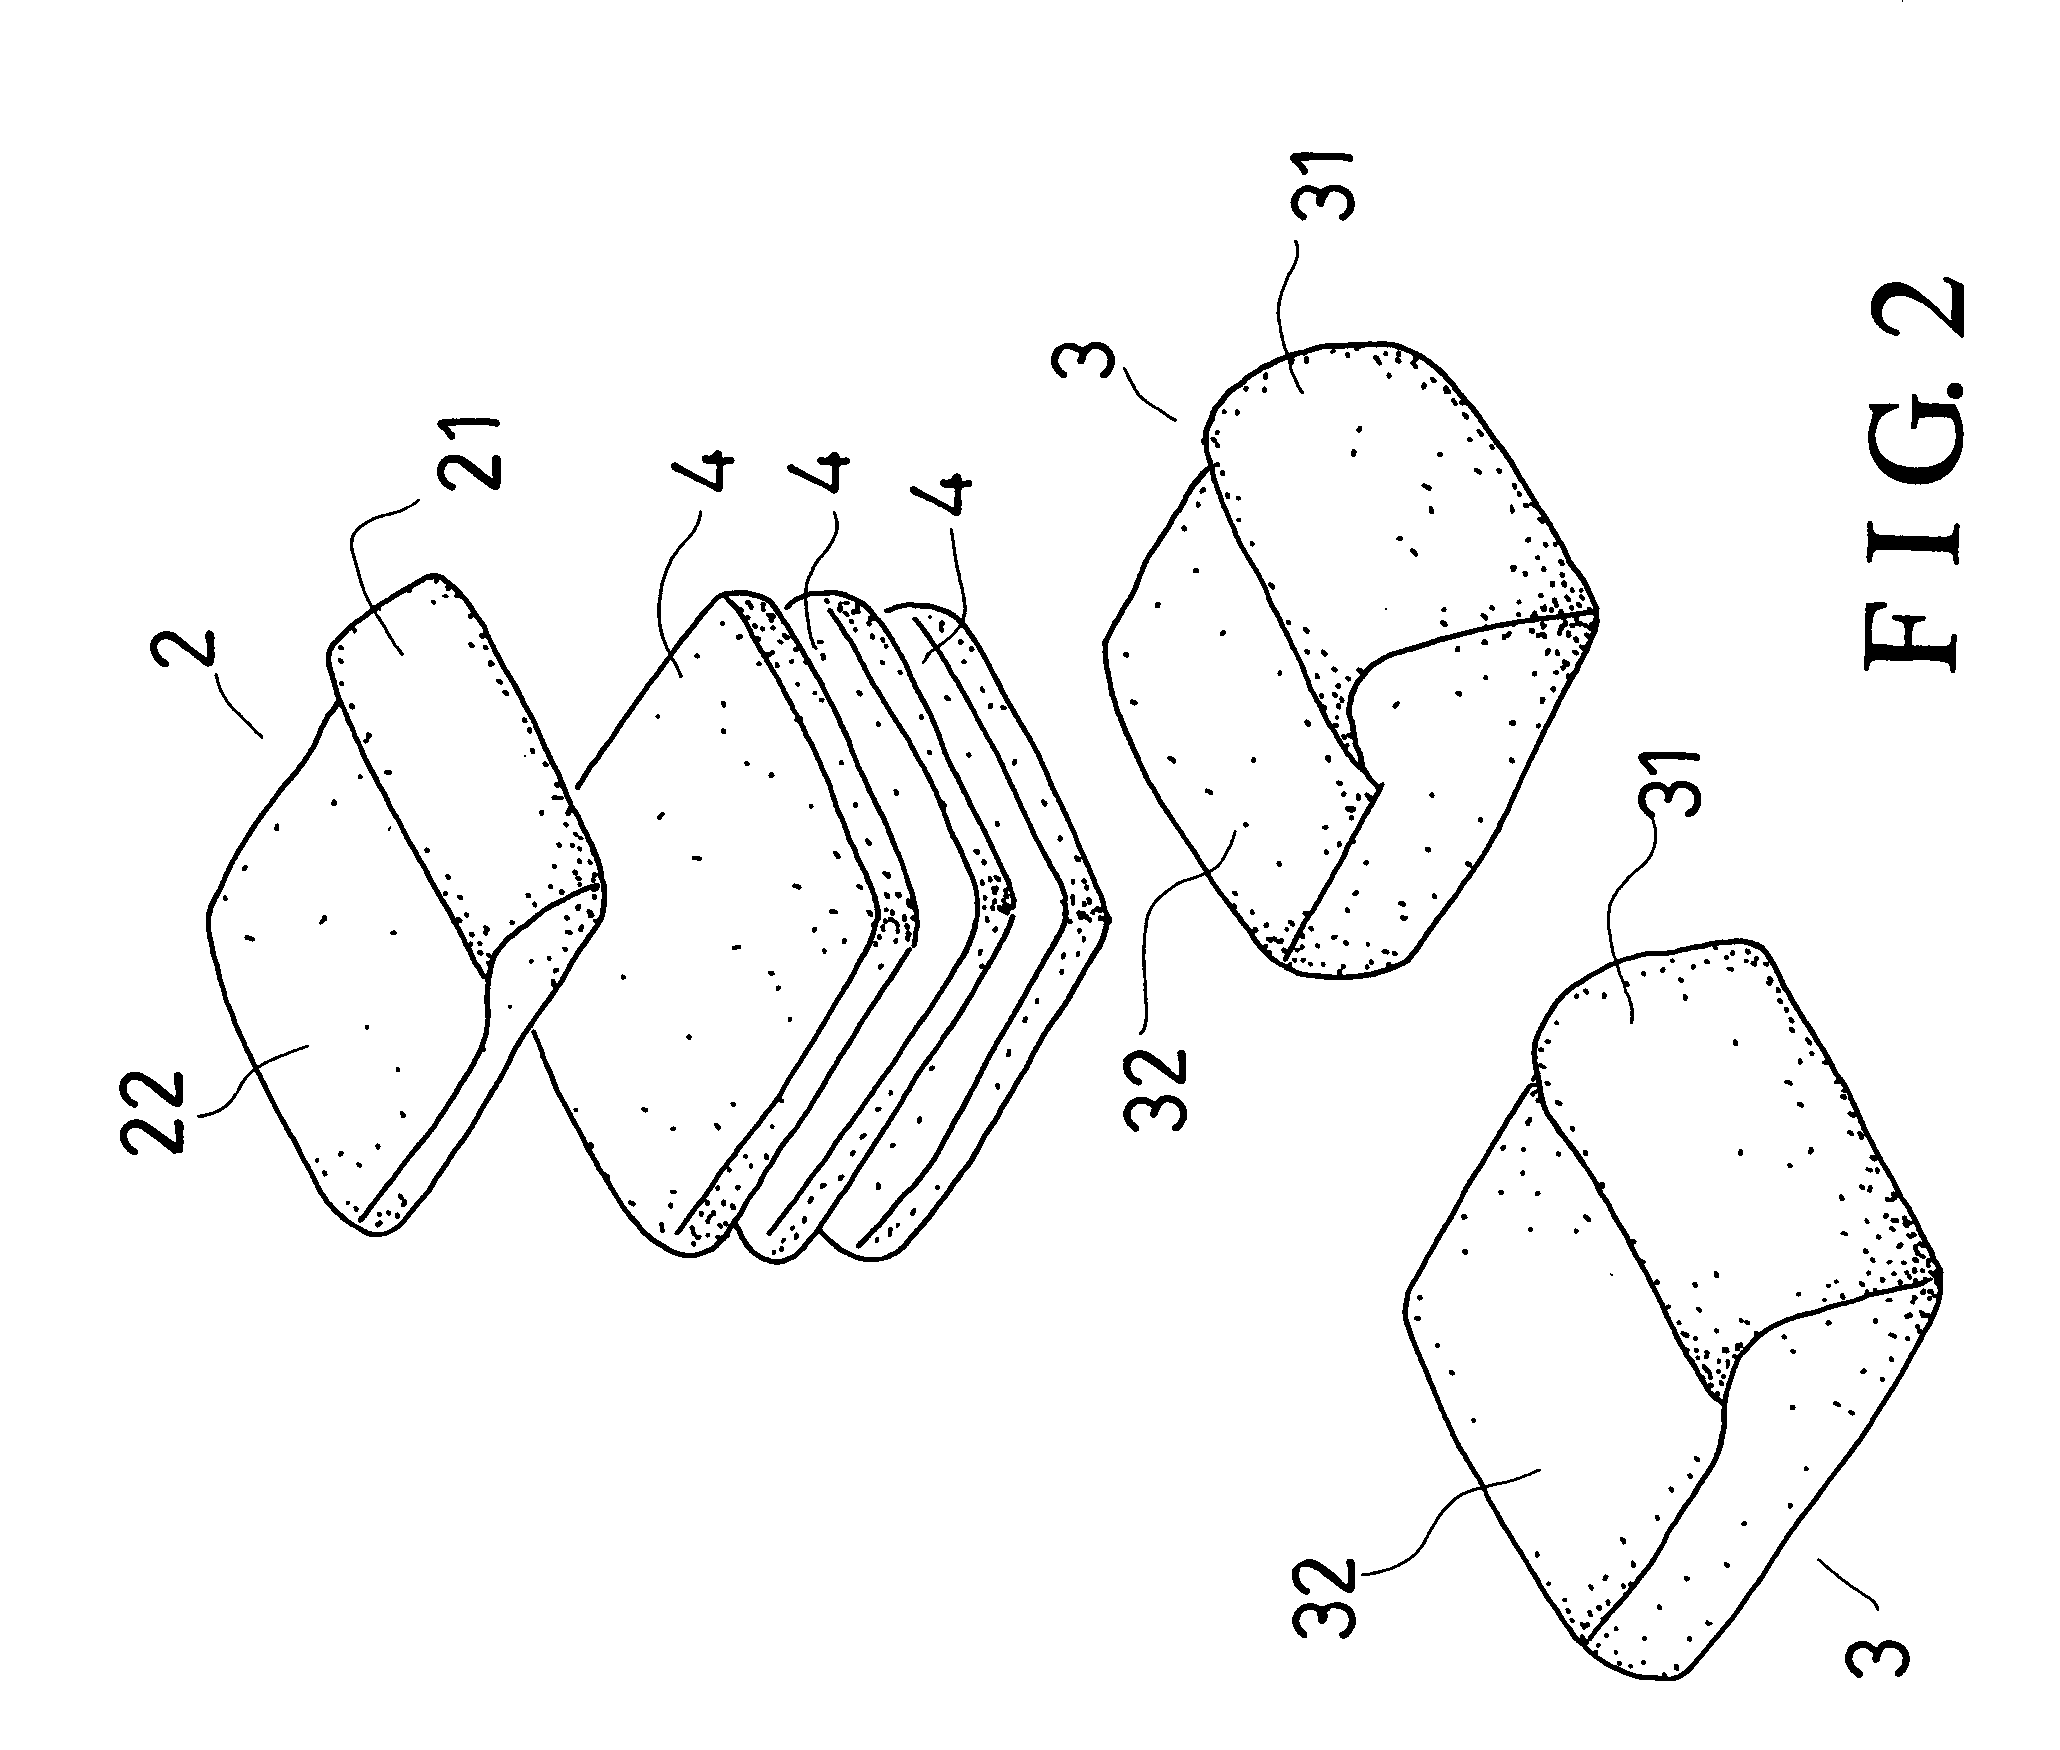 Structure of a pillow